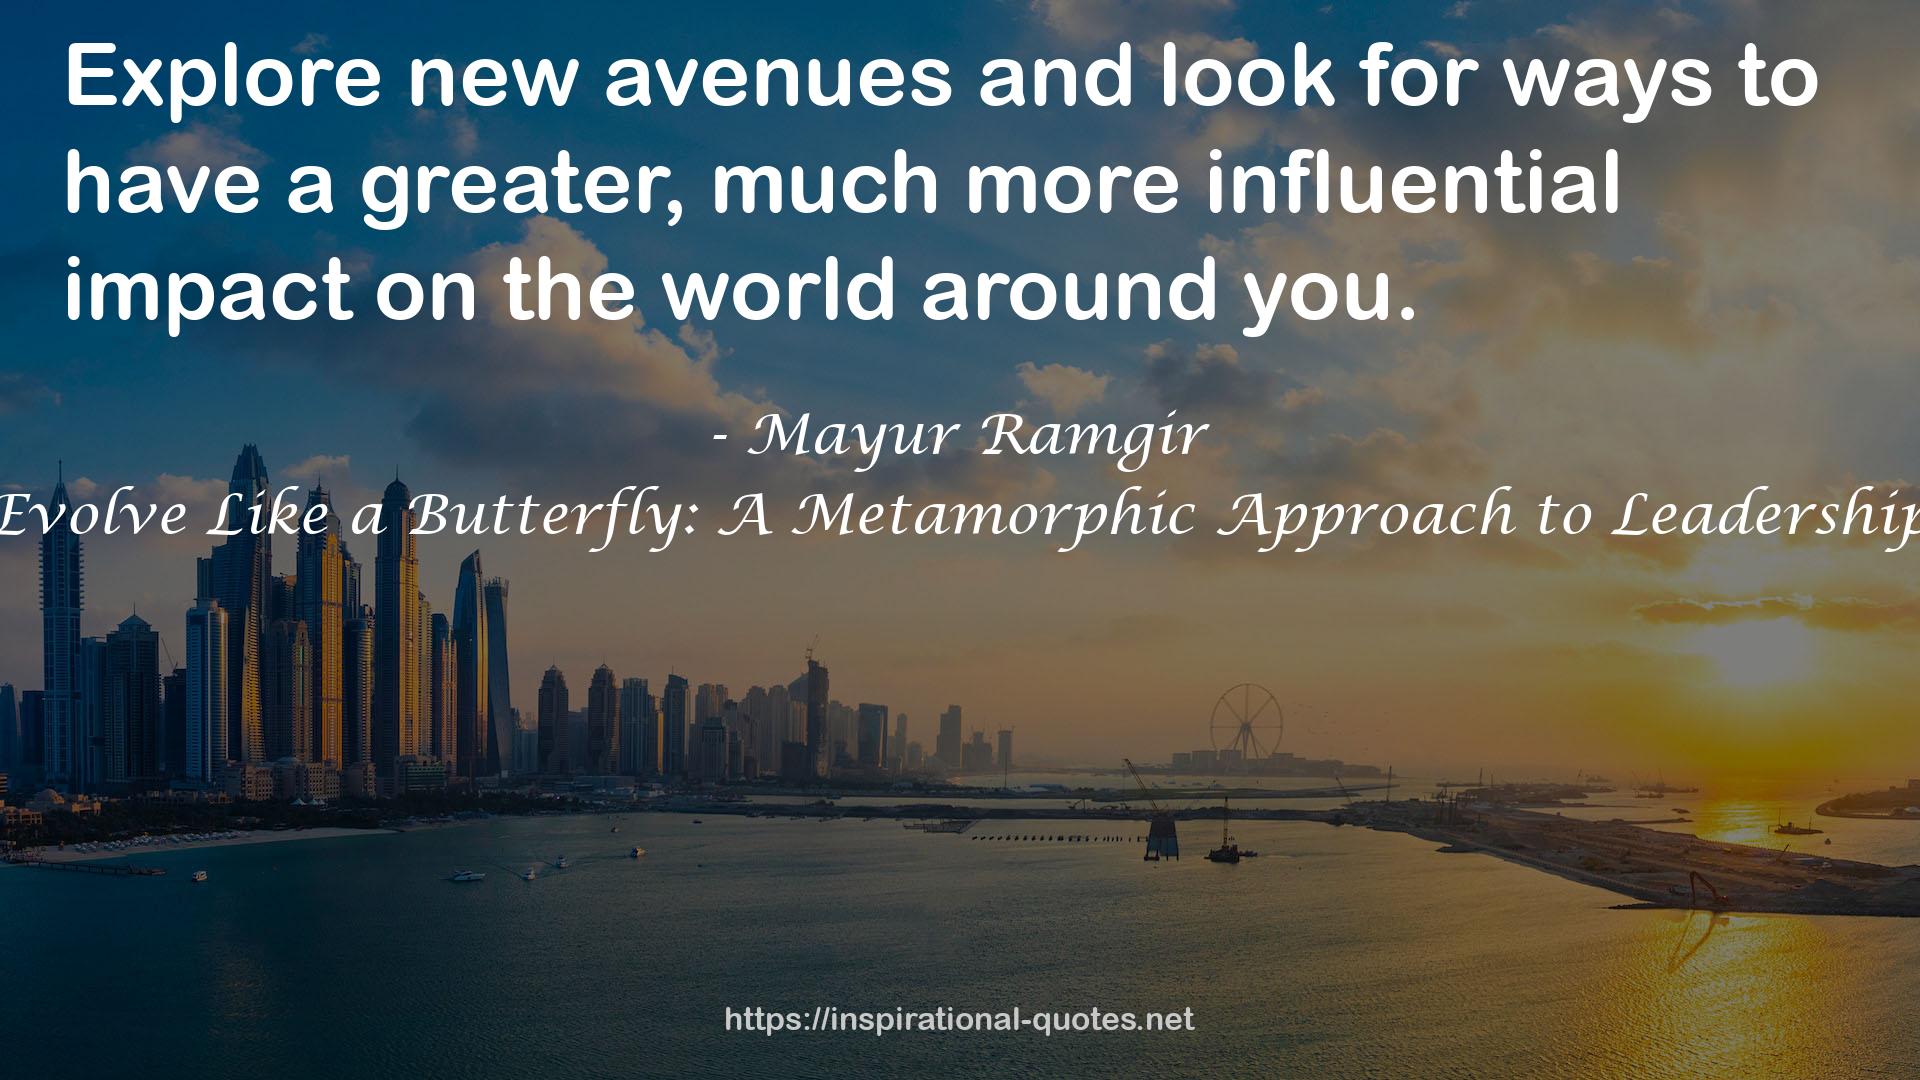 Evolve Like a Butterfly: A Metamorphic Approach to Leadership QUOTES